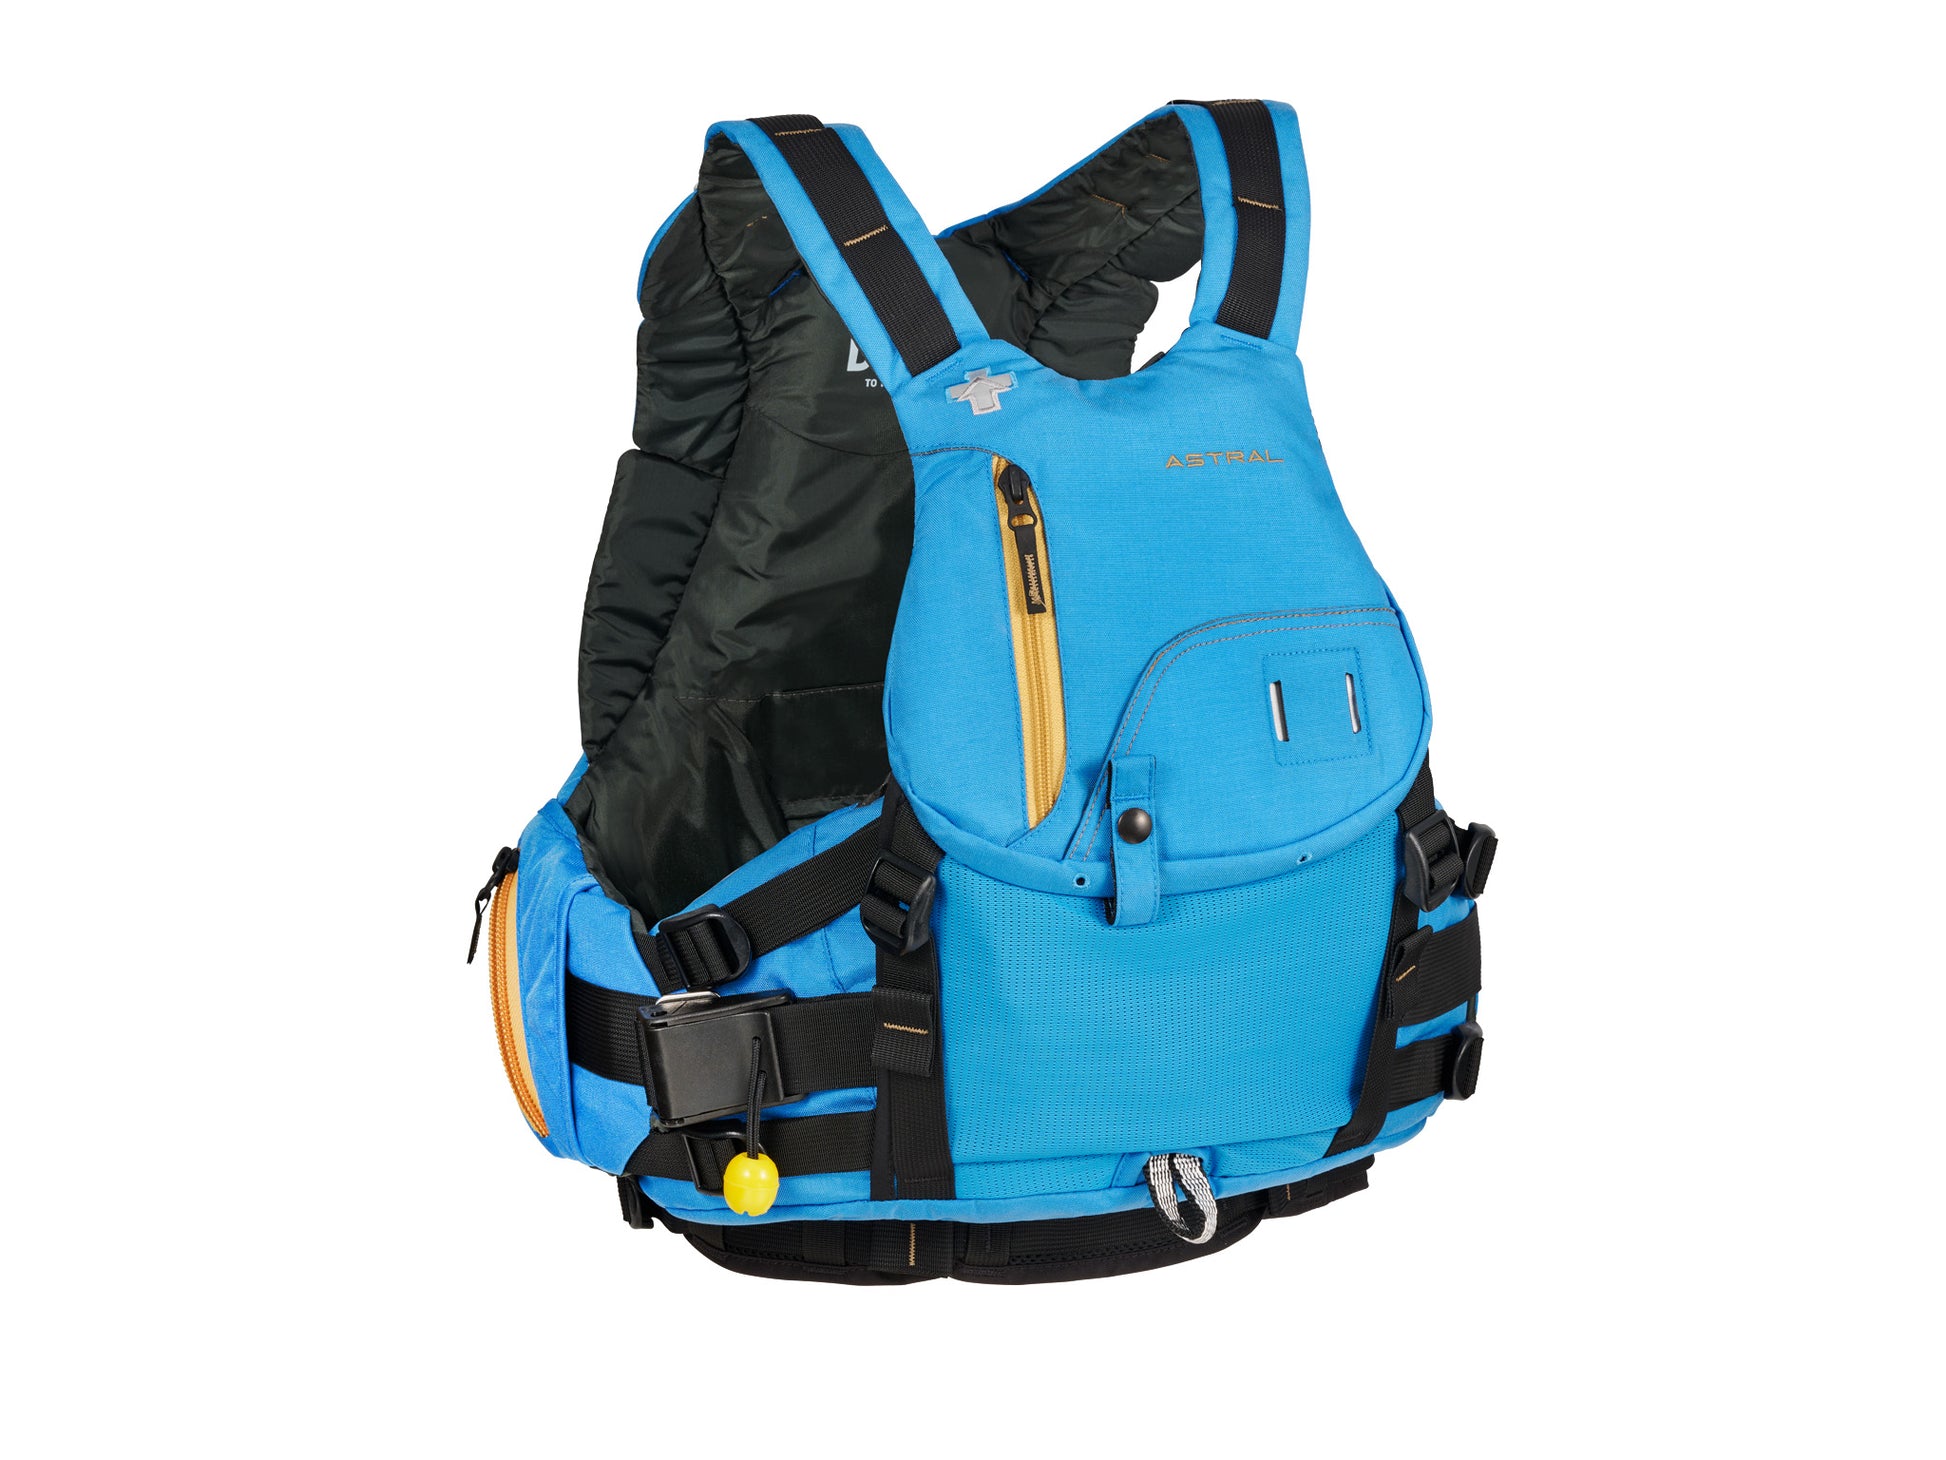 A blue Indus High Float Rescue PFD with yellow straps by Astral.